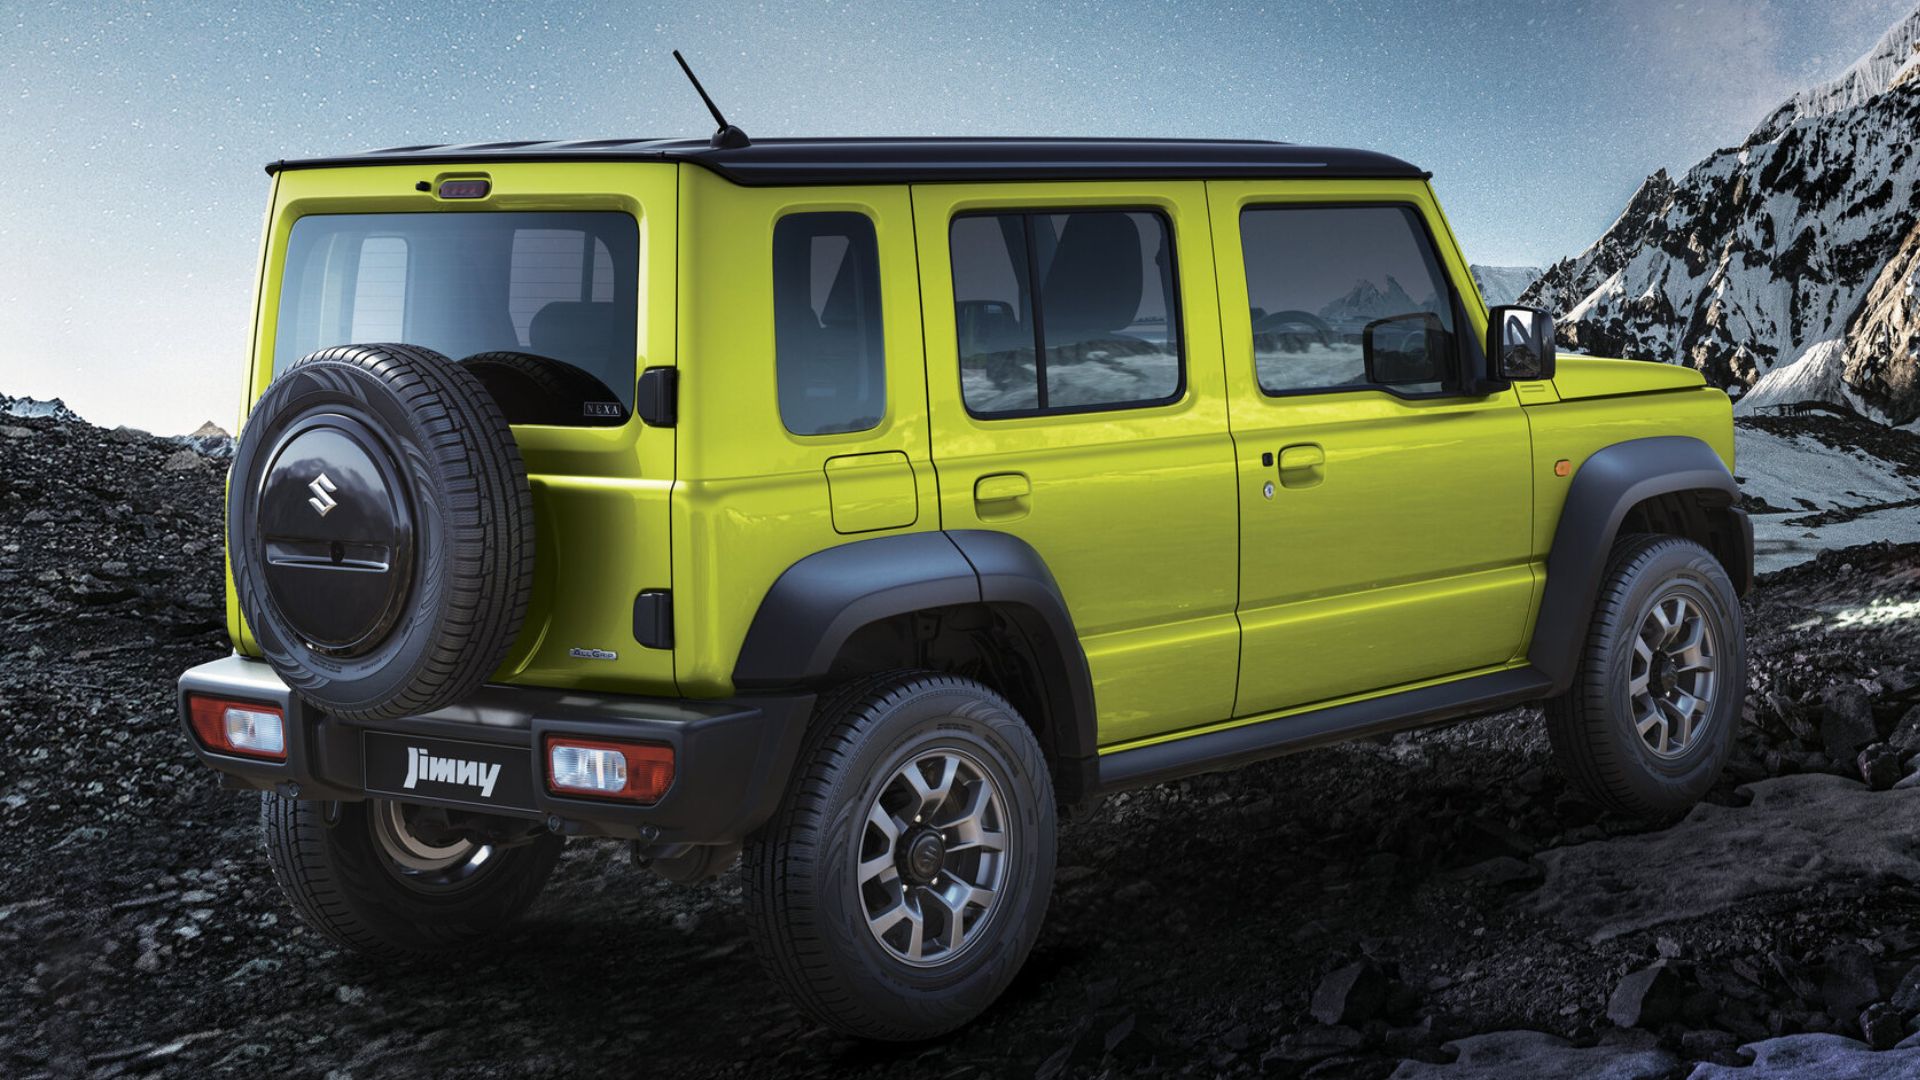 What are the possible prices of the 5door Jimny in PH?